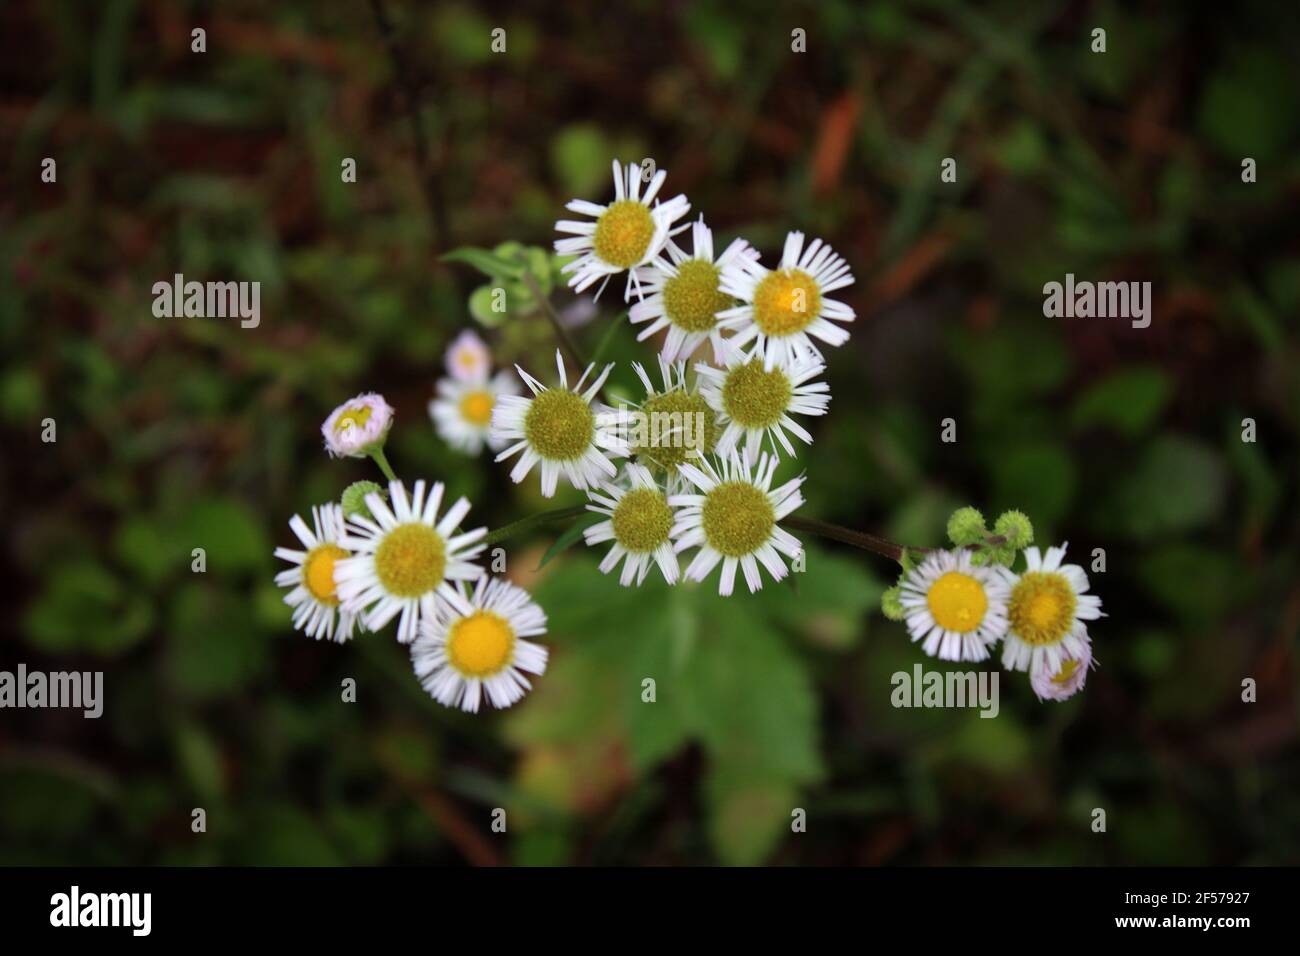 a bunch of tiny daisies in vignette on blurred background Stock Photo